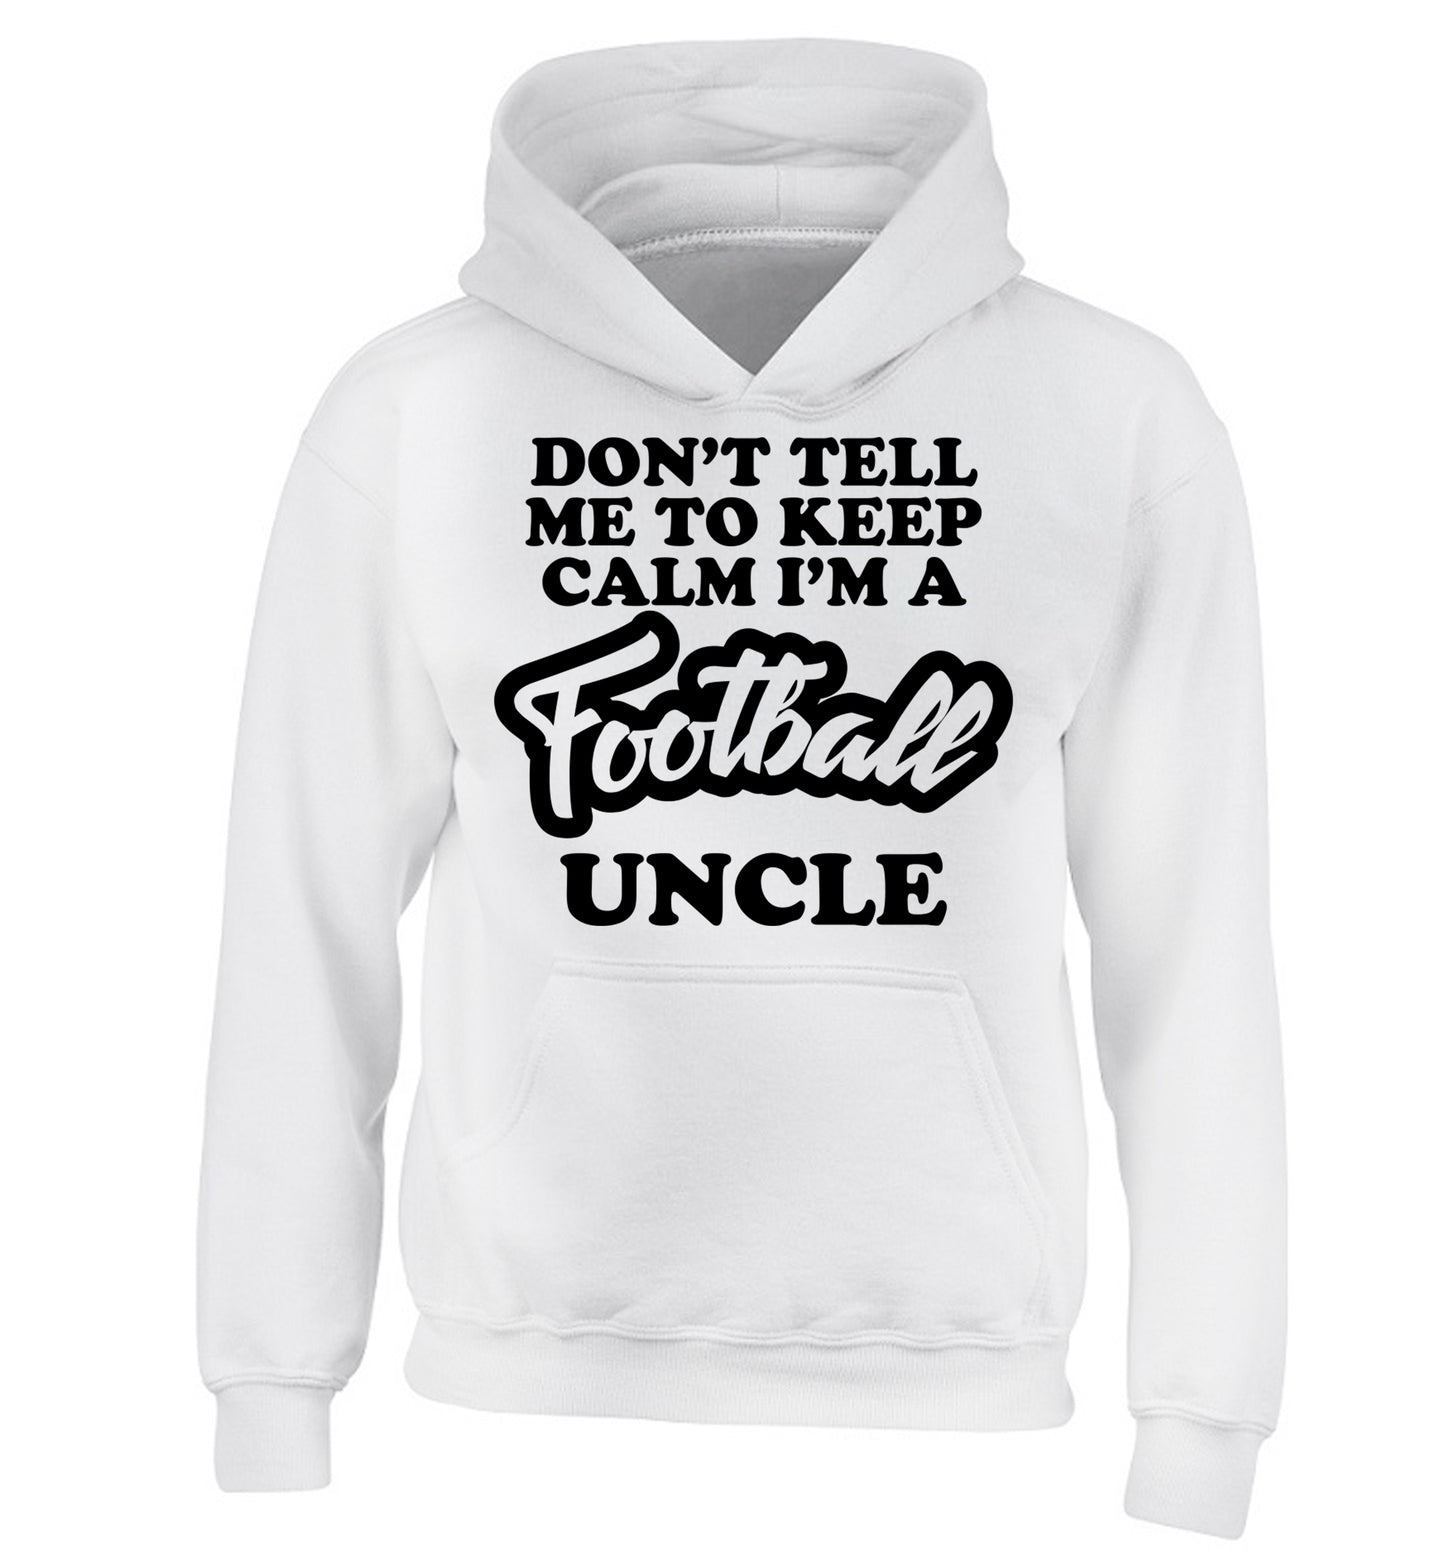 Don't tell me to keep calm I'm a football uncle children's white hoodie 12-14 Years